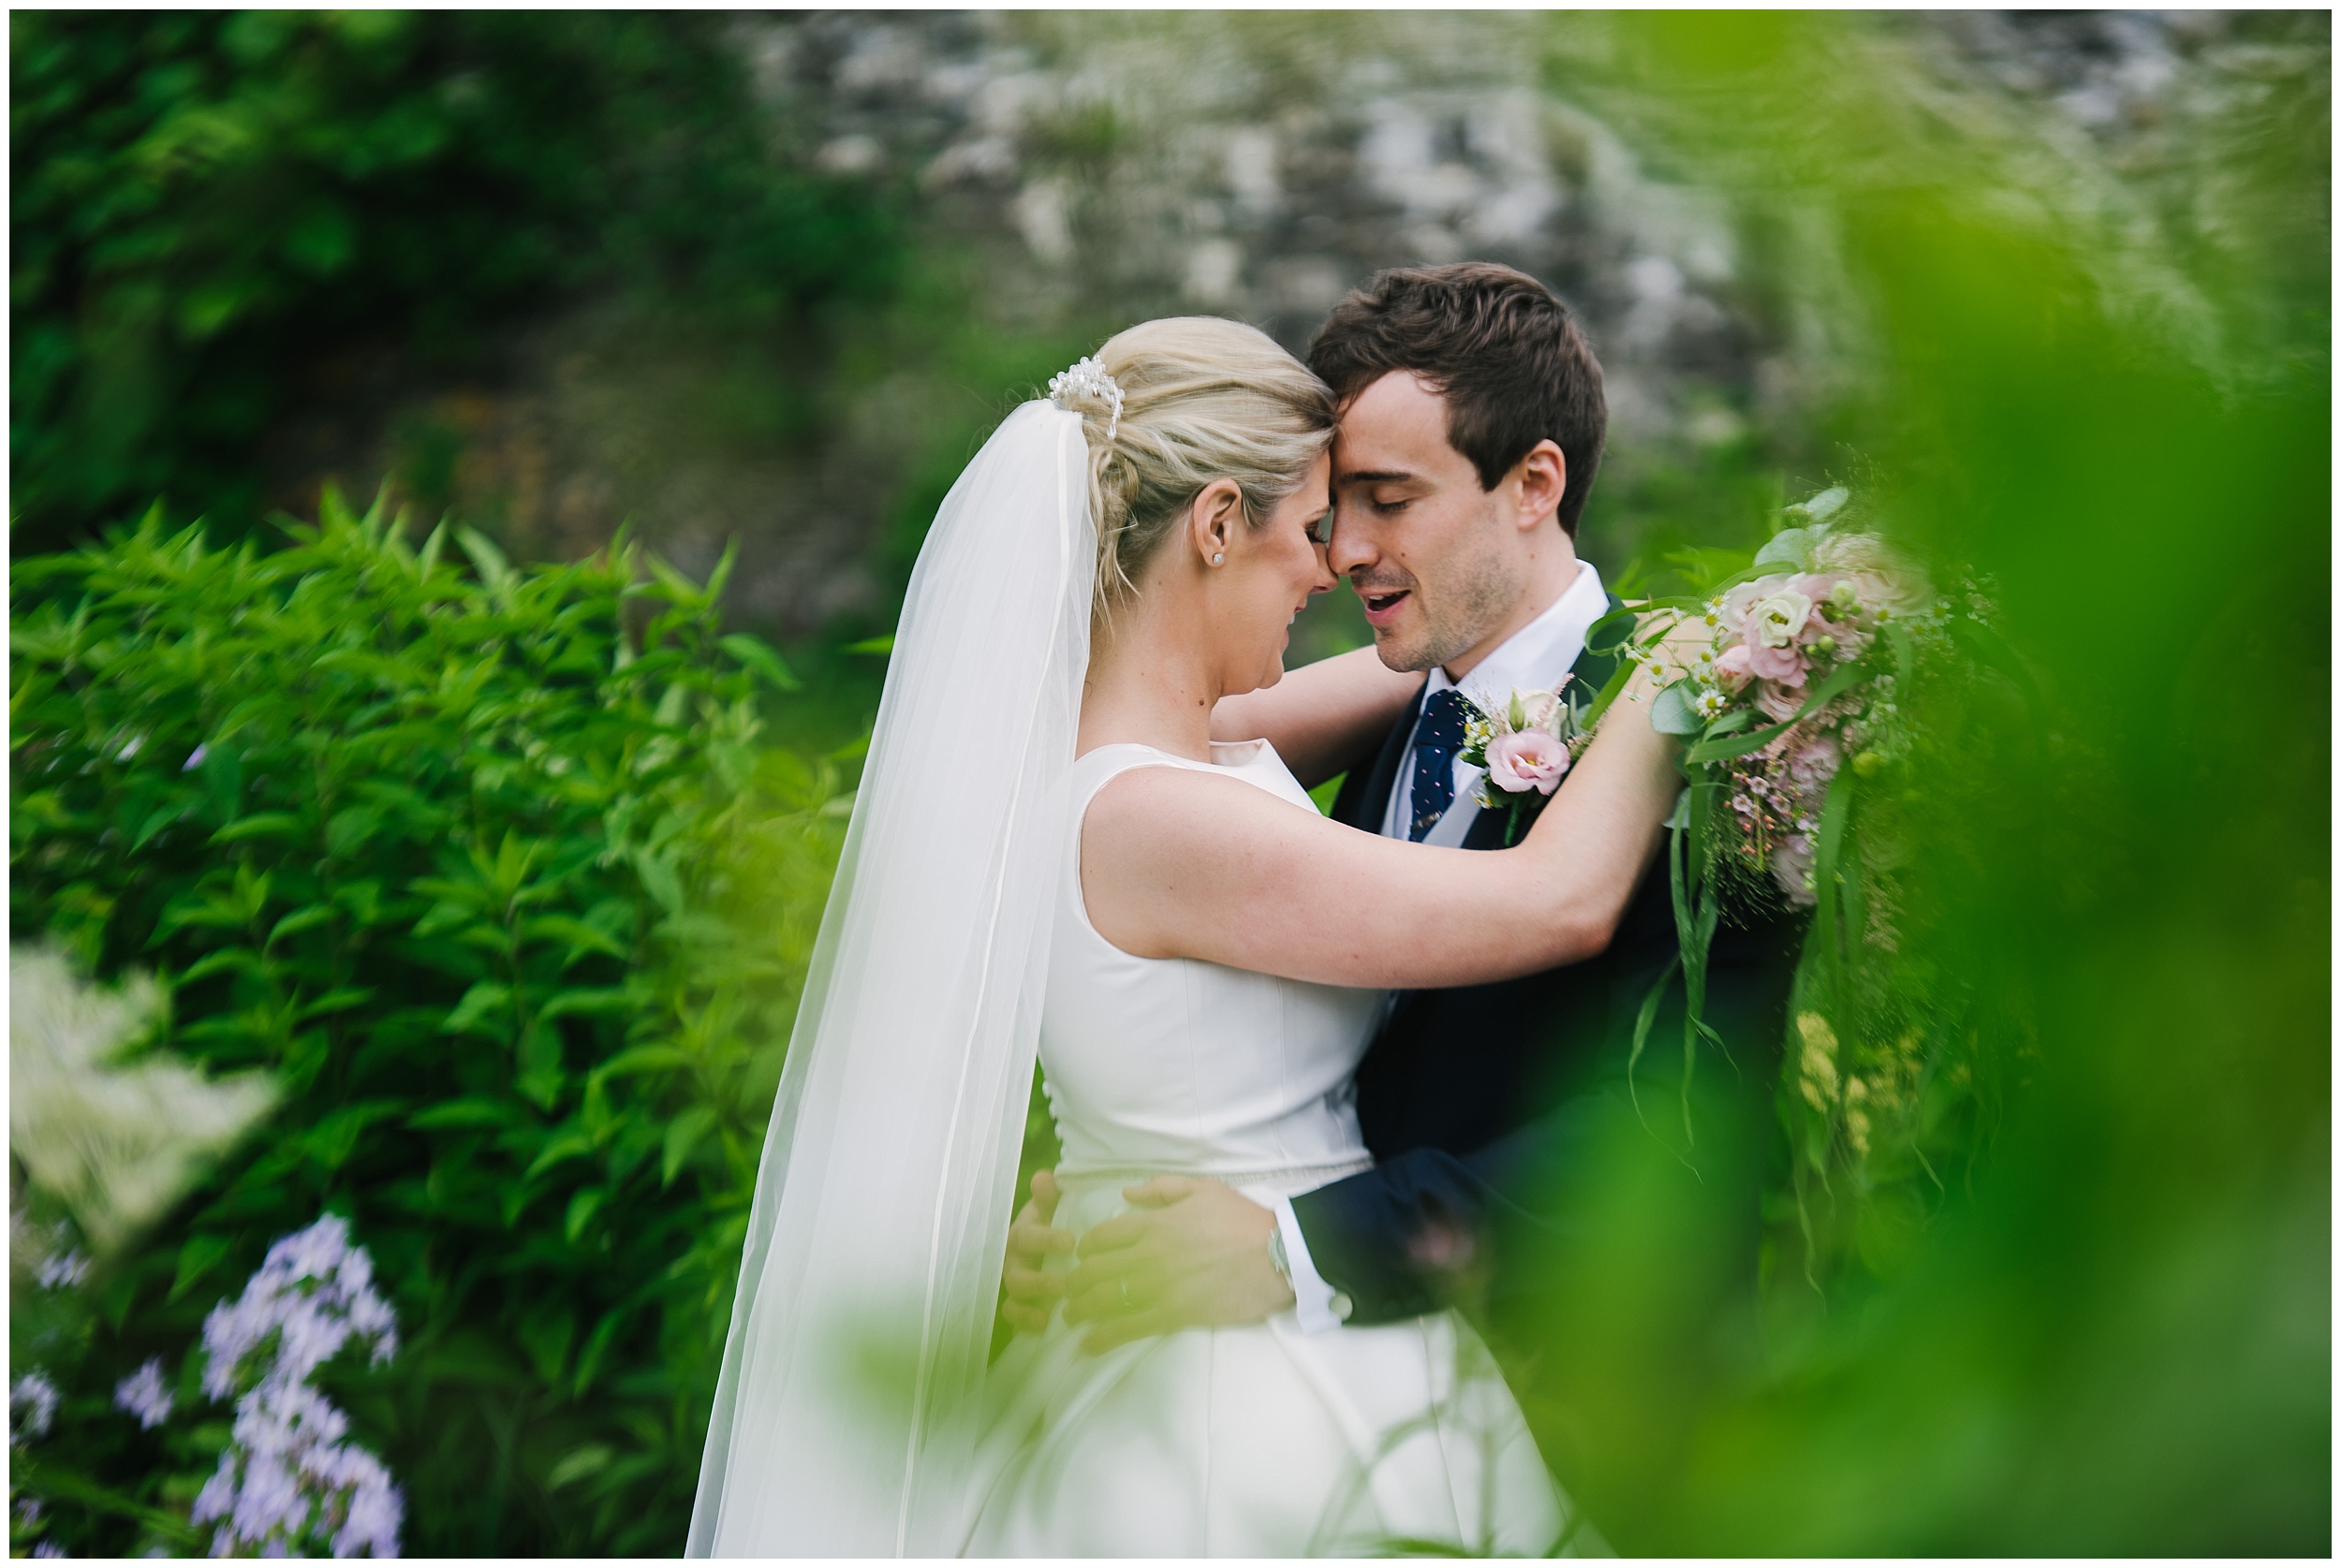 Bride and Groom at Aberglasney Gardens on their wedding day